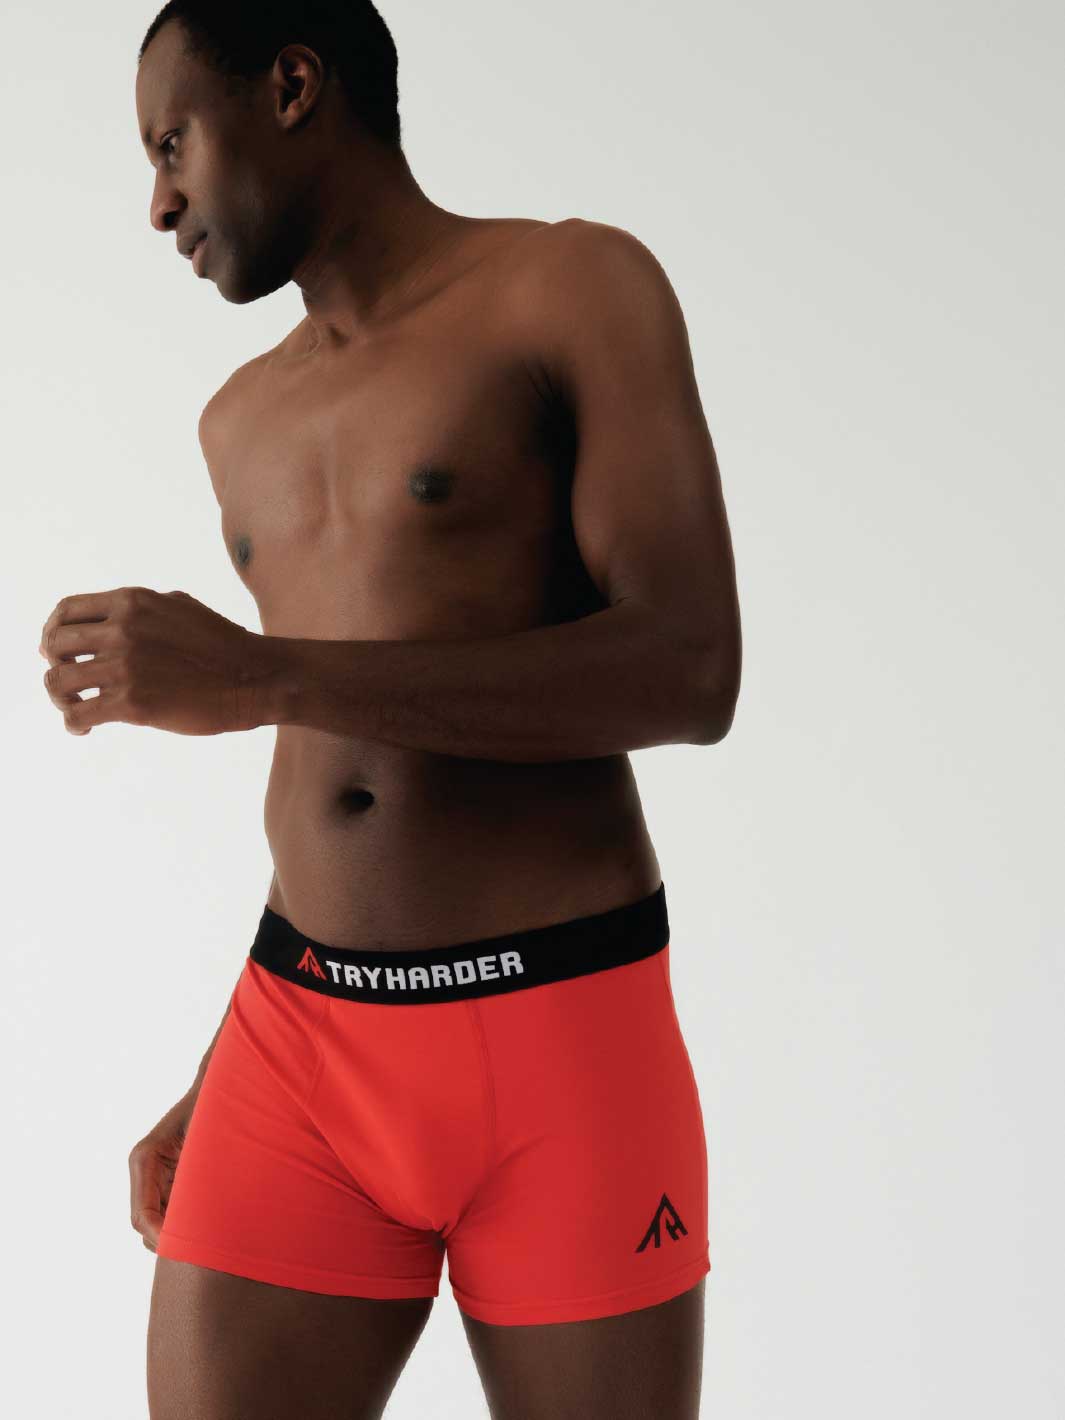 TRYHARDER - Boxer - Red 1 pack